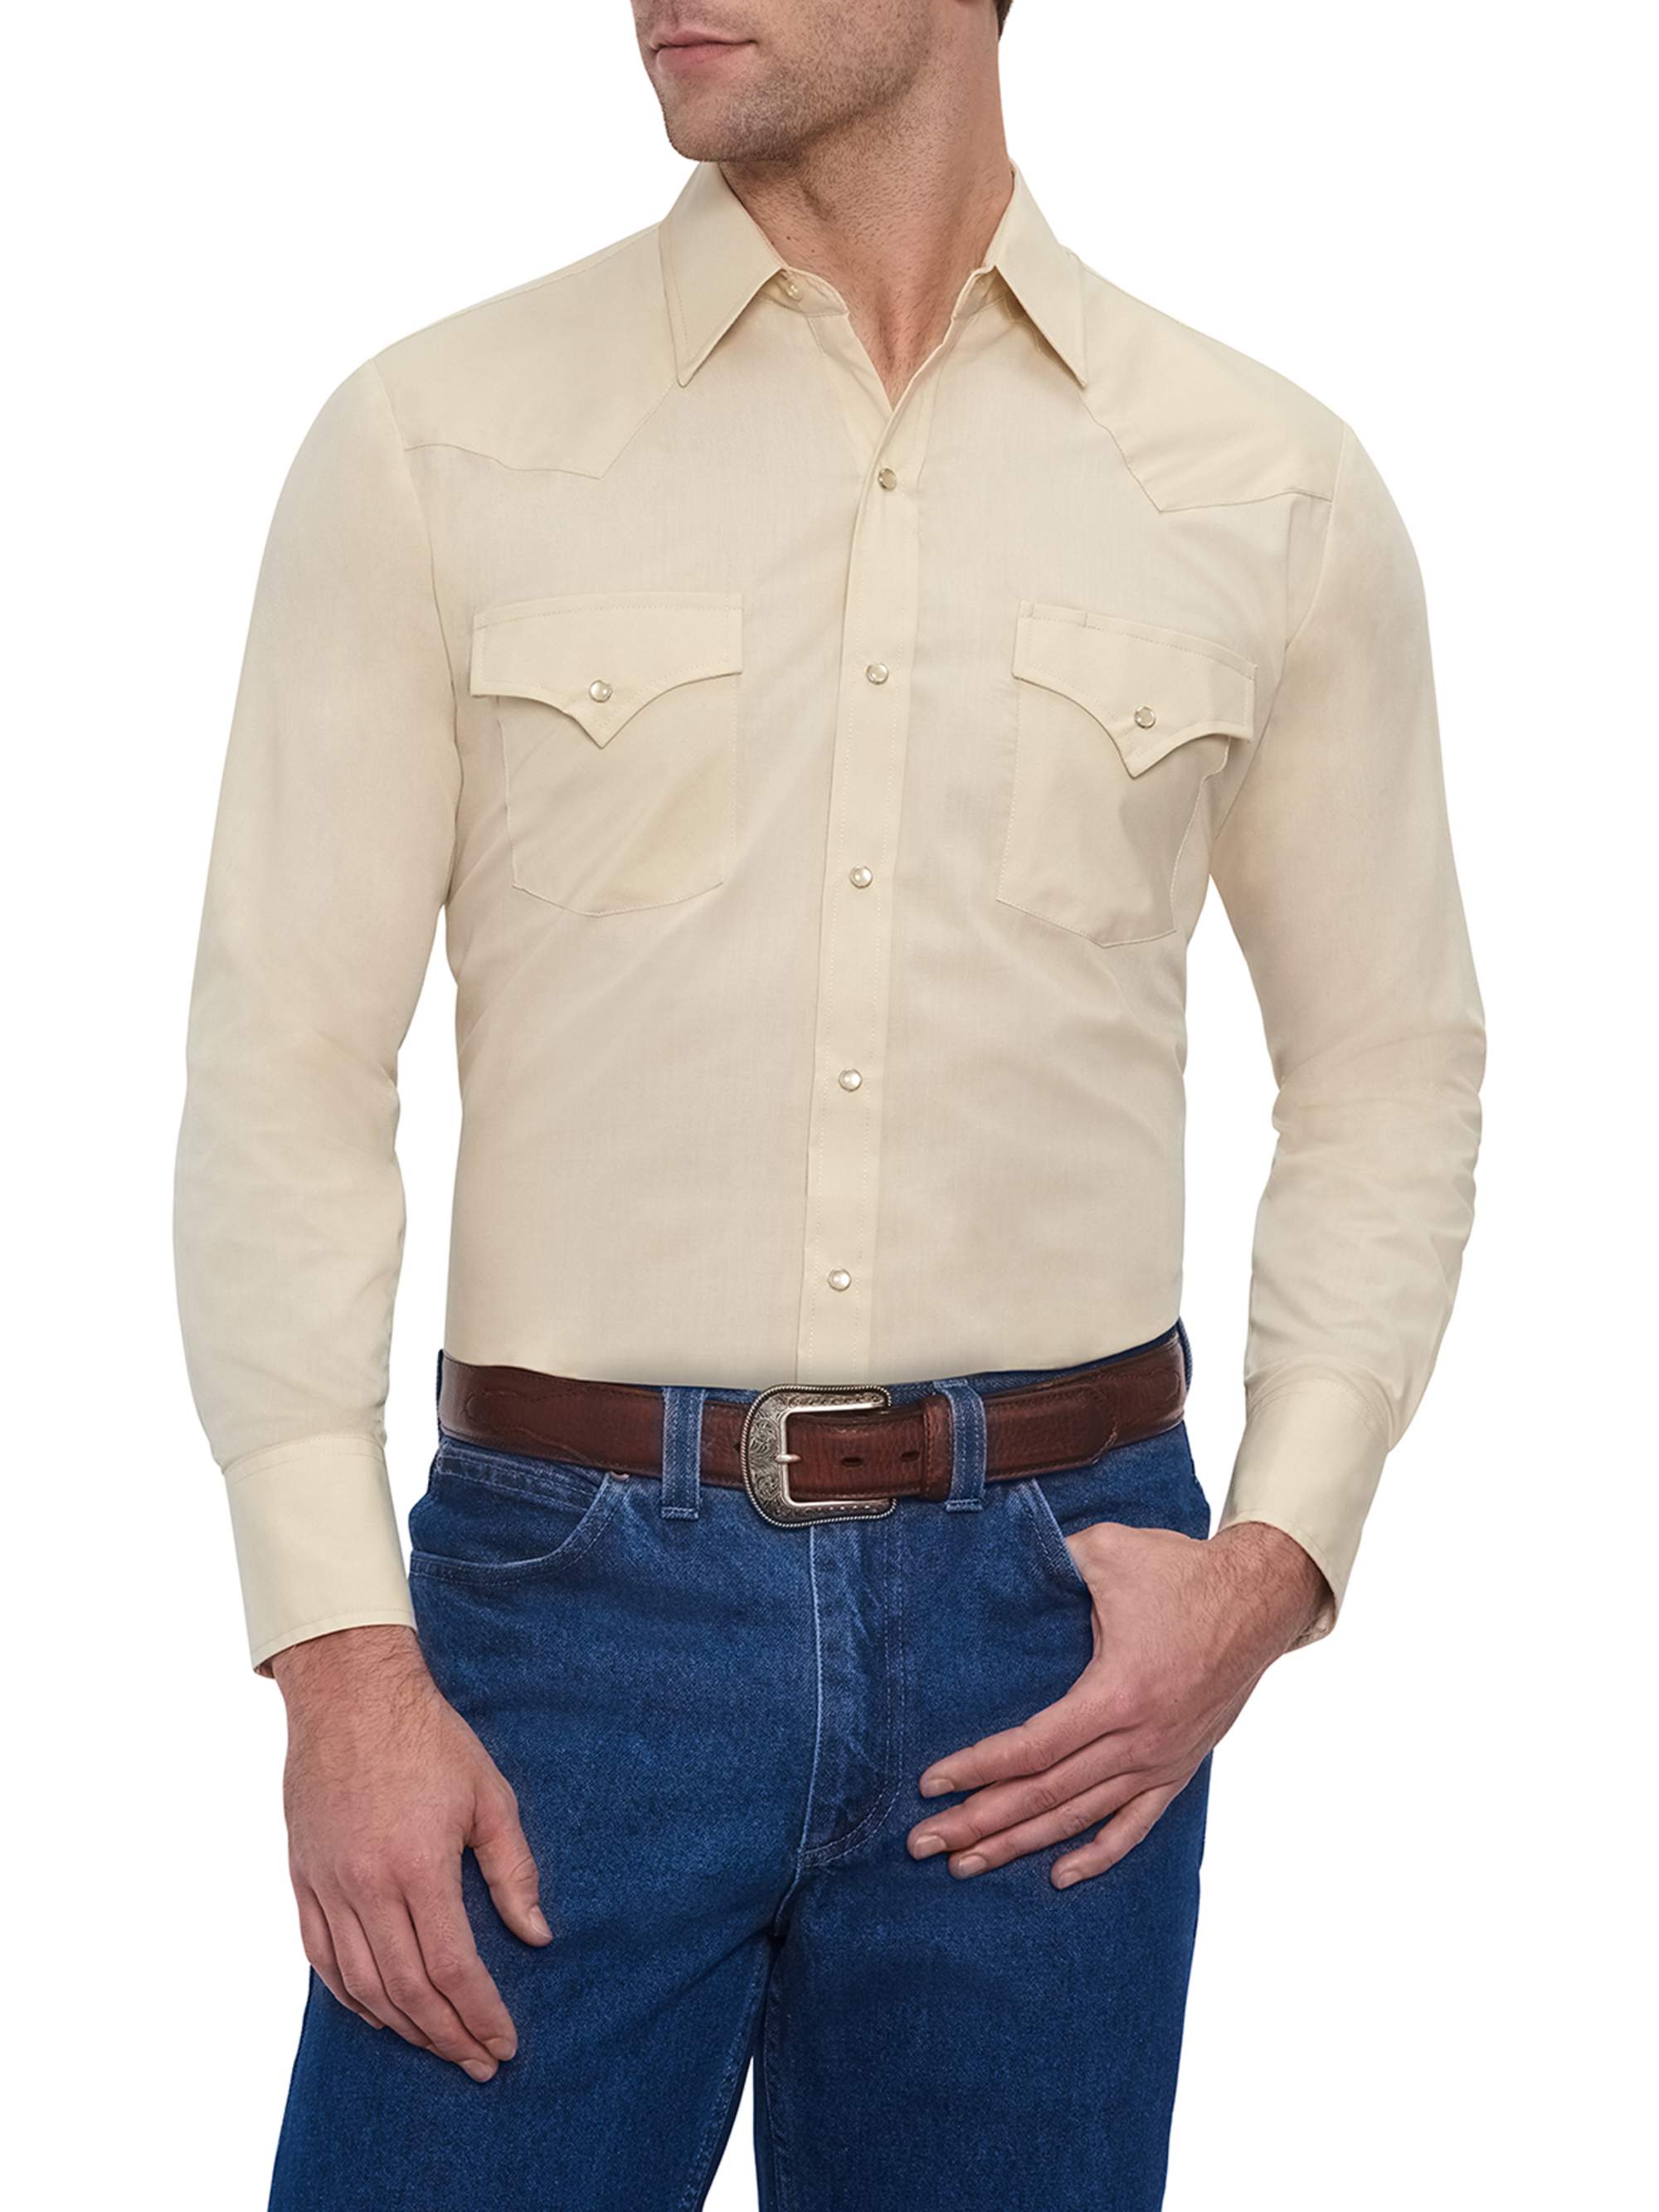 Ely Cattleman Men's Long Sleeve Solid Western Shirt - image 1 of 2